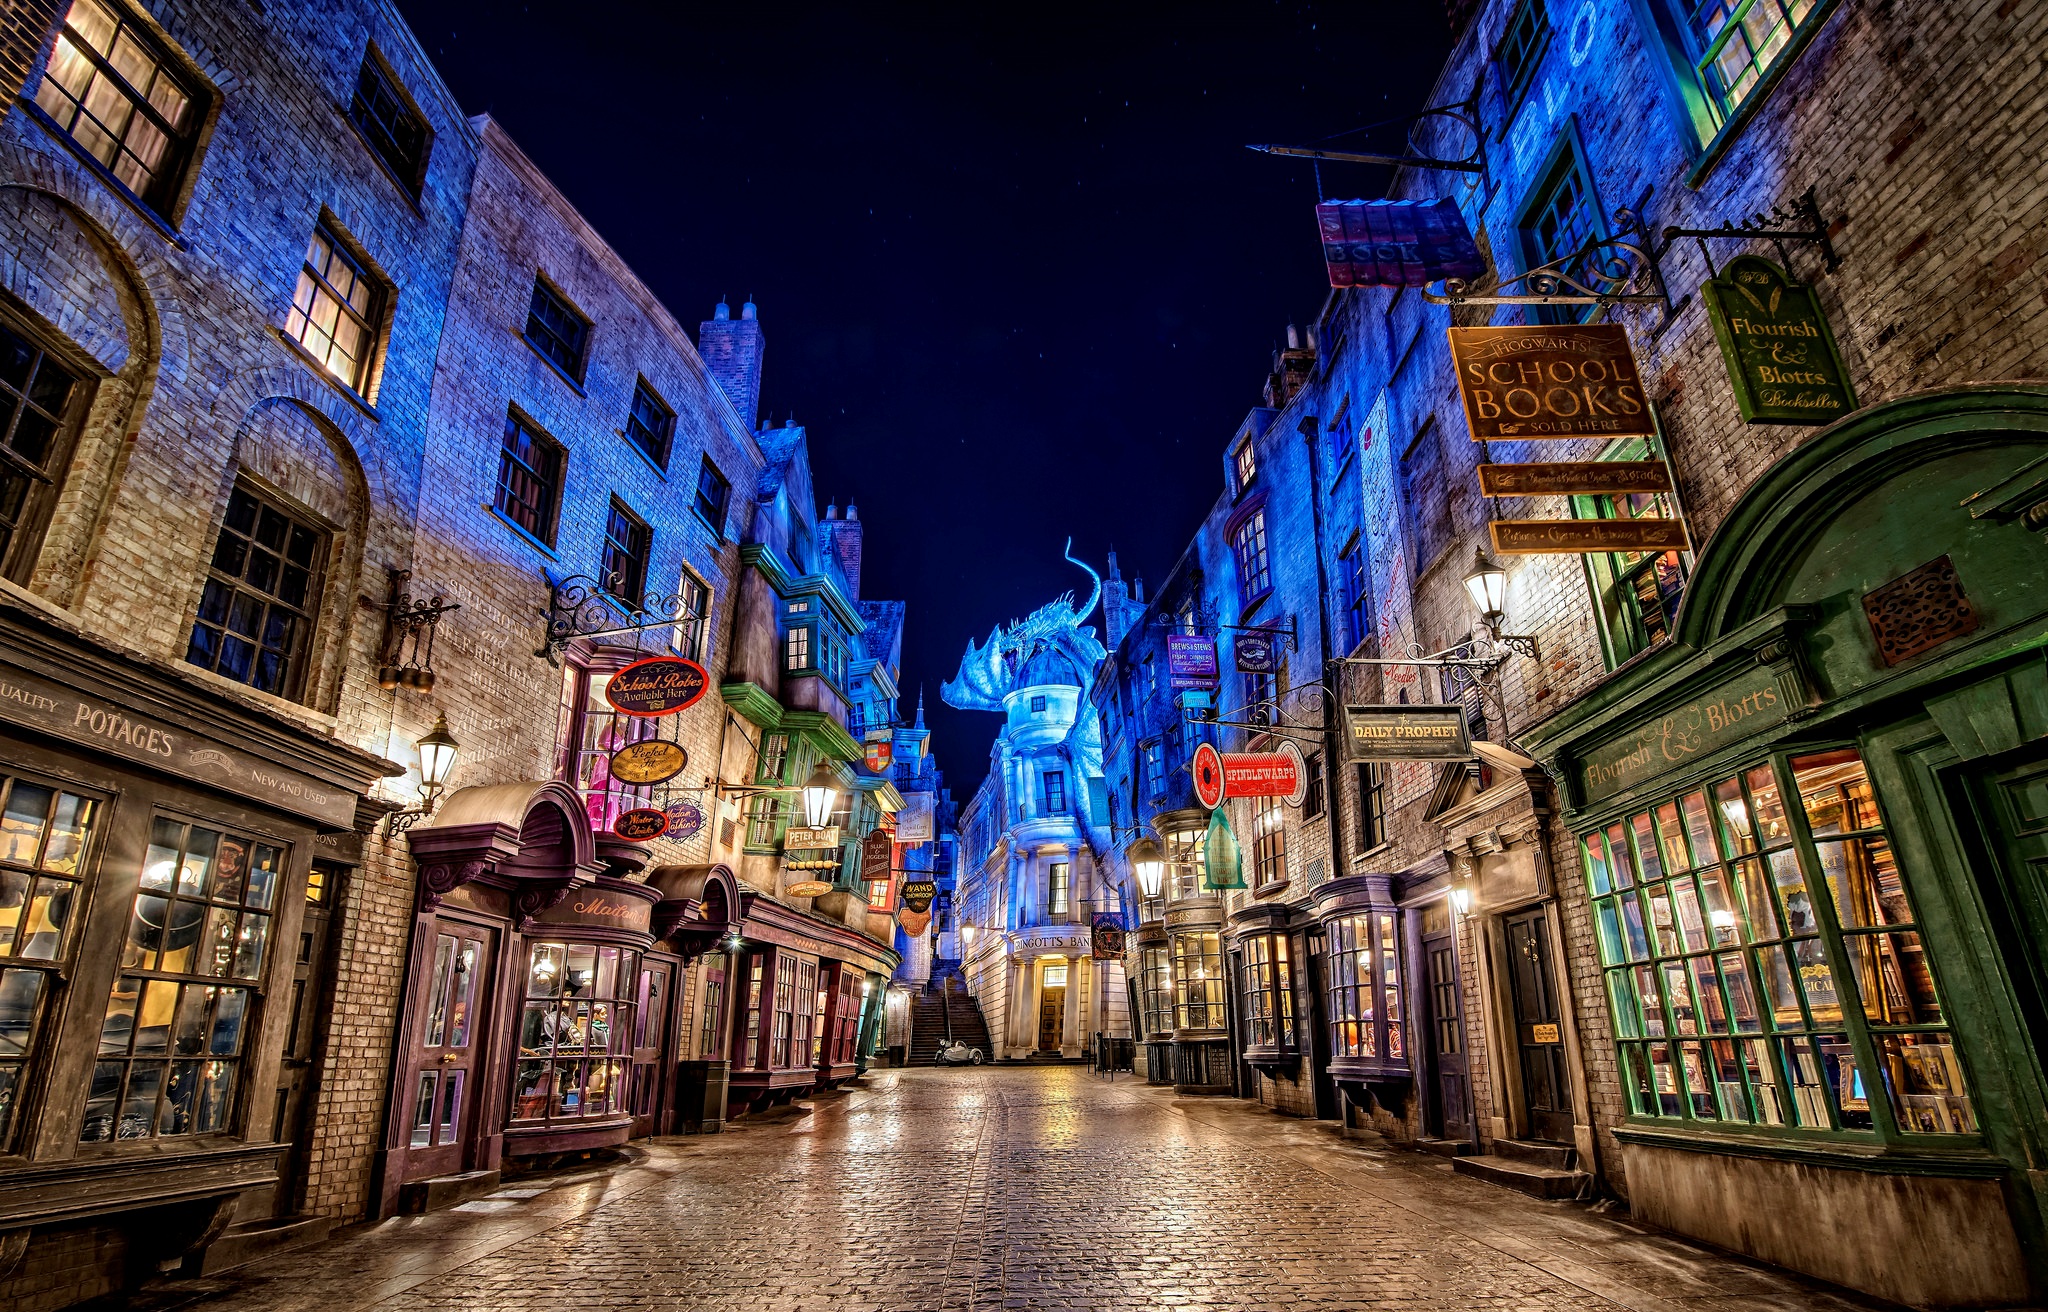 Diagon Alley From Harry Potter At Universal Studios - Harry Potter Diagon Alley Background , HD Wallpaper & Backgrounds